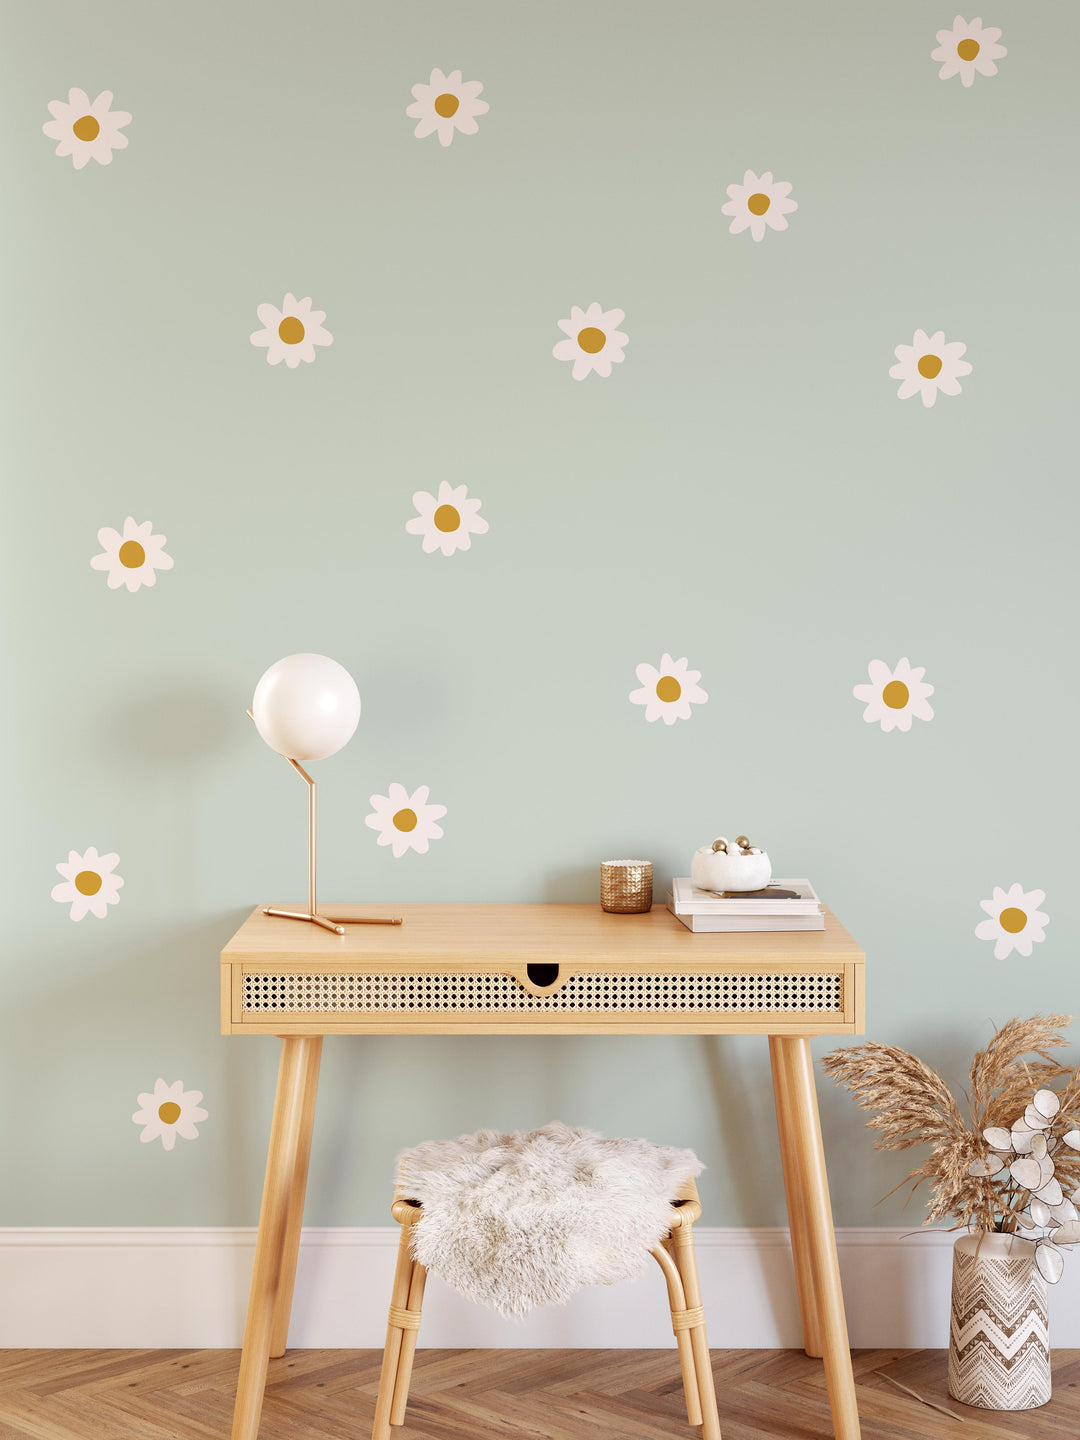 Daisy Floral Decals